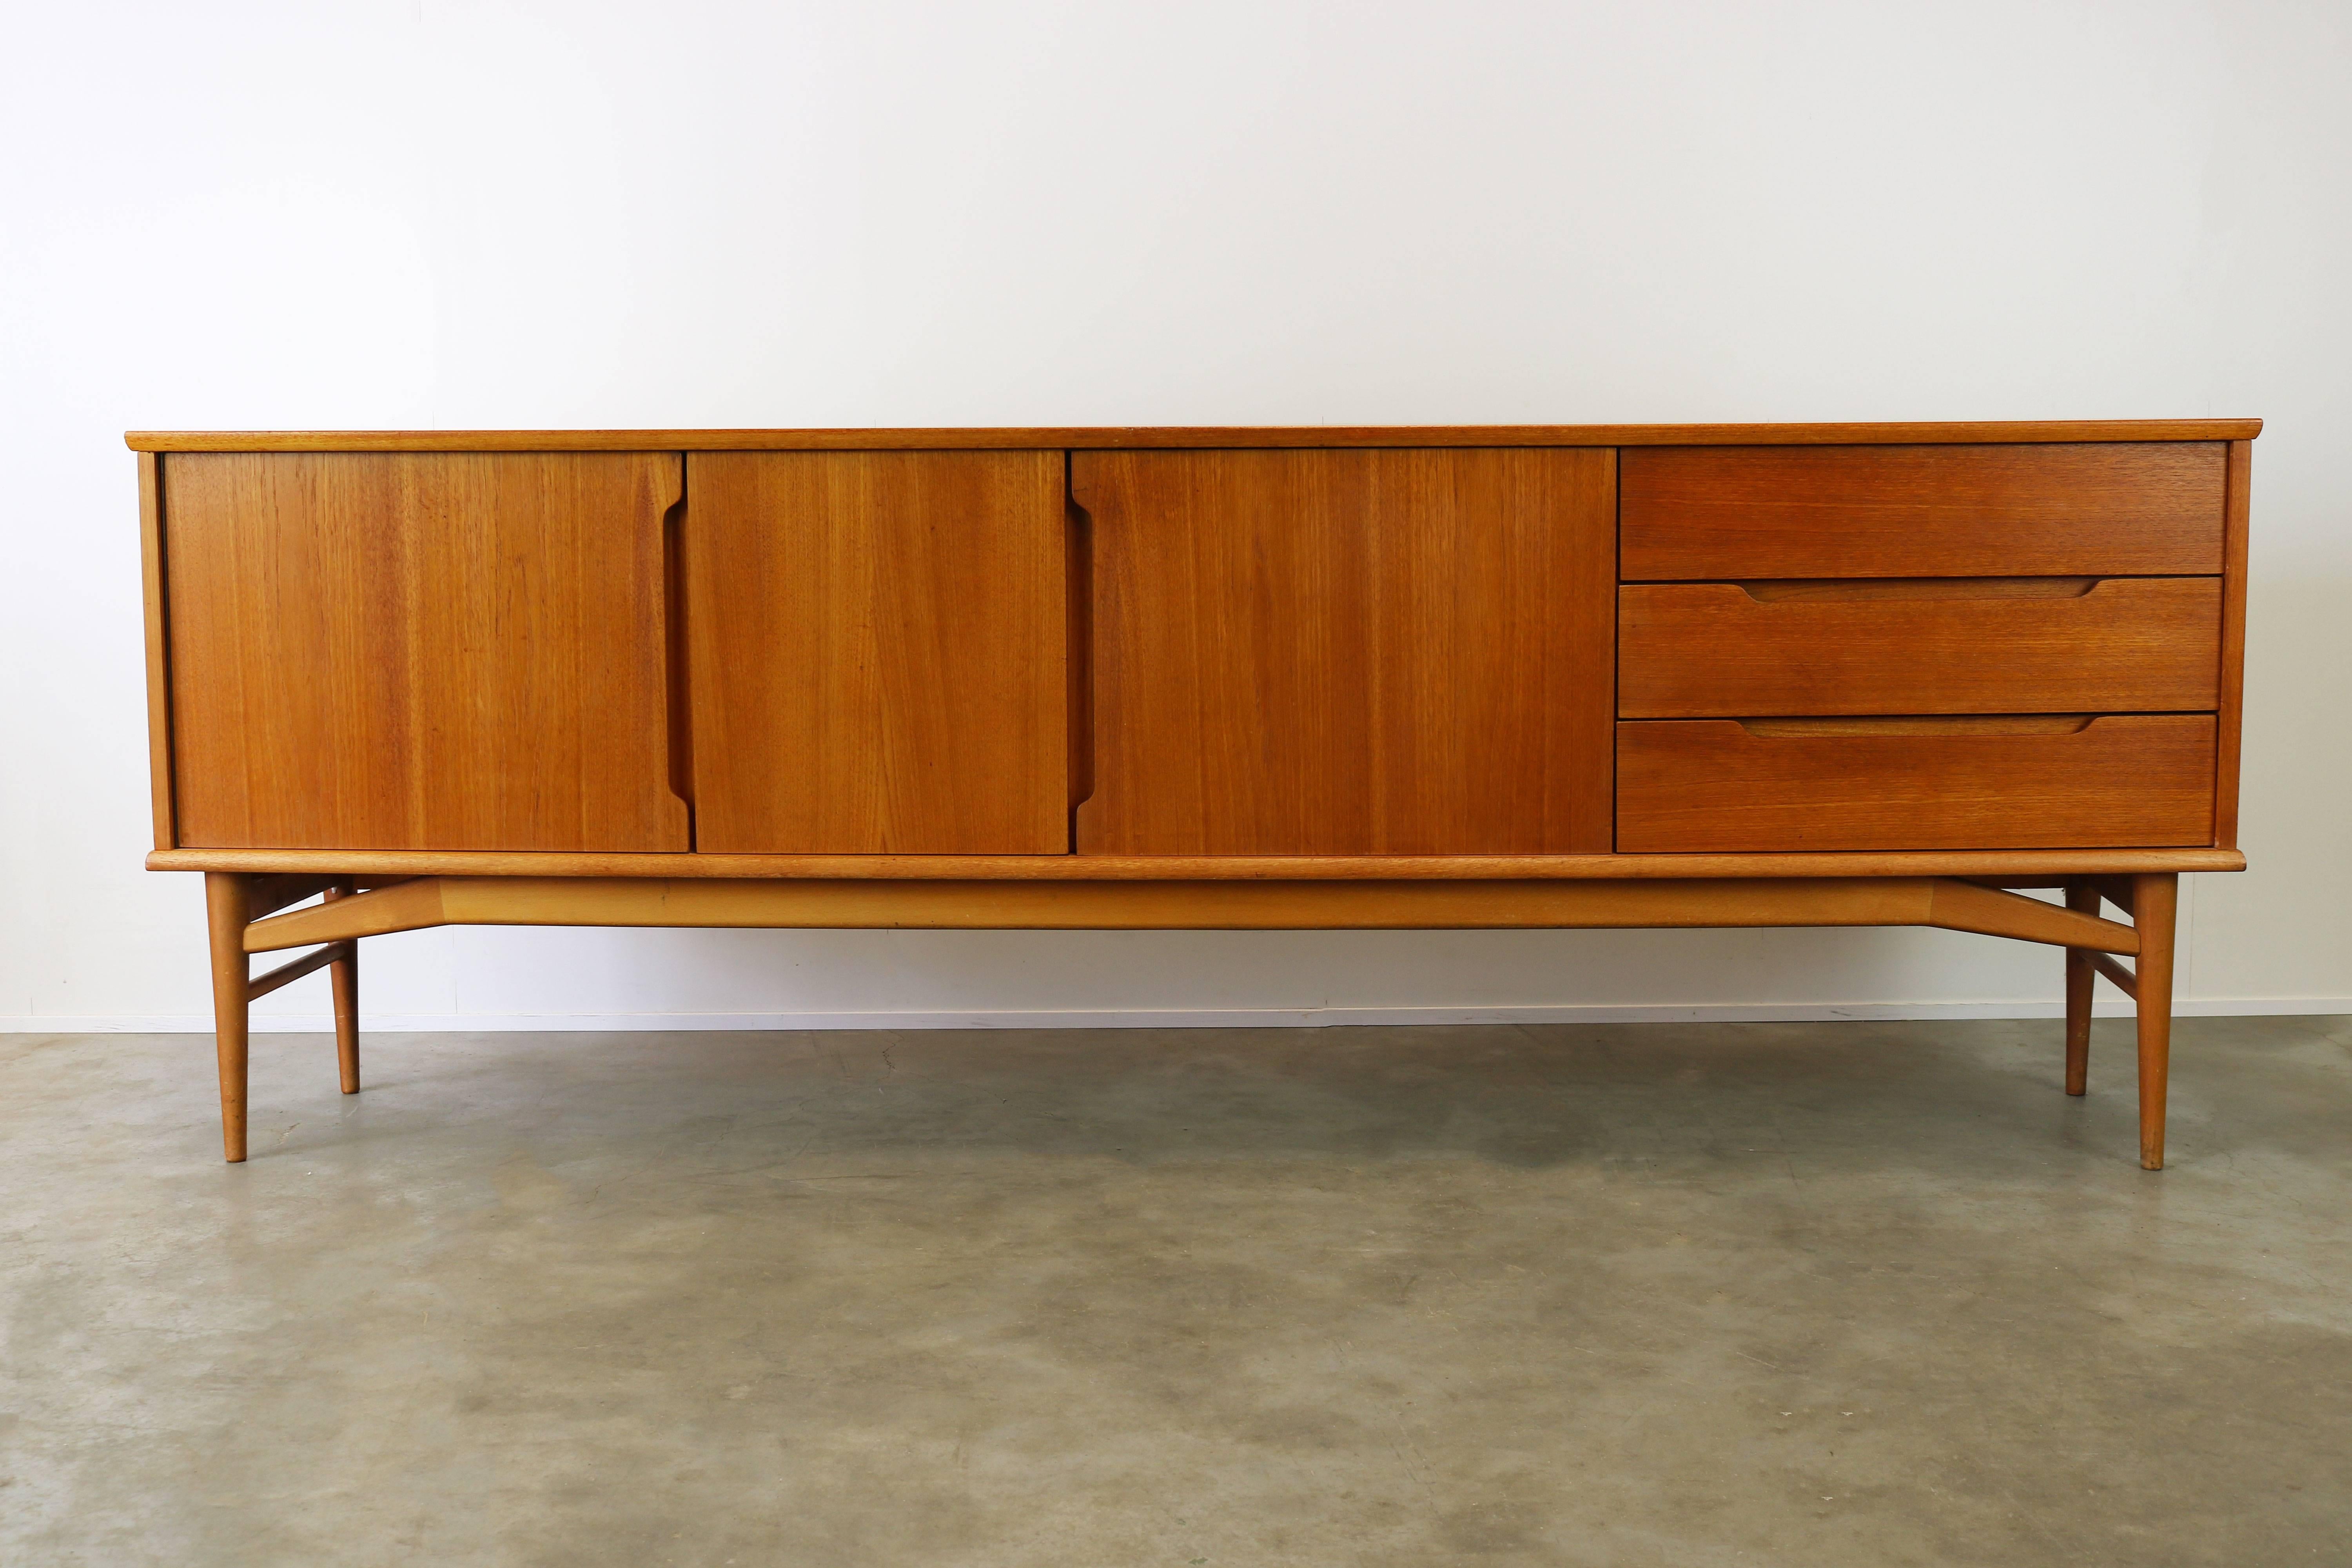 Wonderful Danish design sideboard or credenza by Borge Mogensen for Fredericia 1950. Wonderful clean and straight design that reflects the Danish modern design movement. The sideboard has three drawers a shelf and offers plenty of storage space.